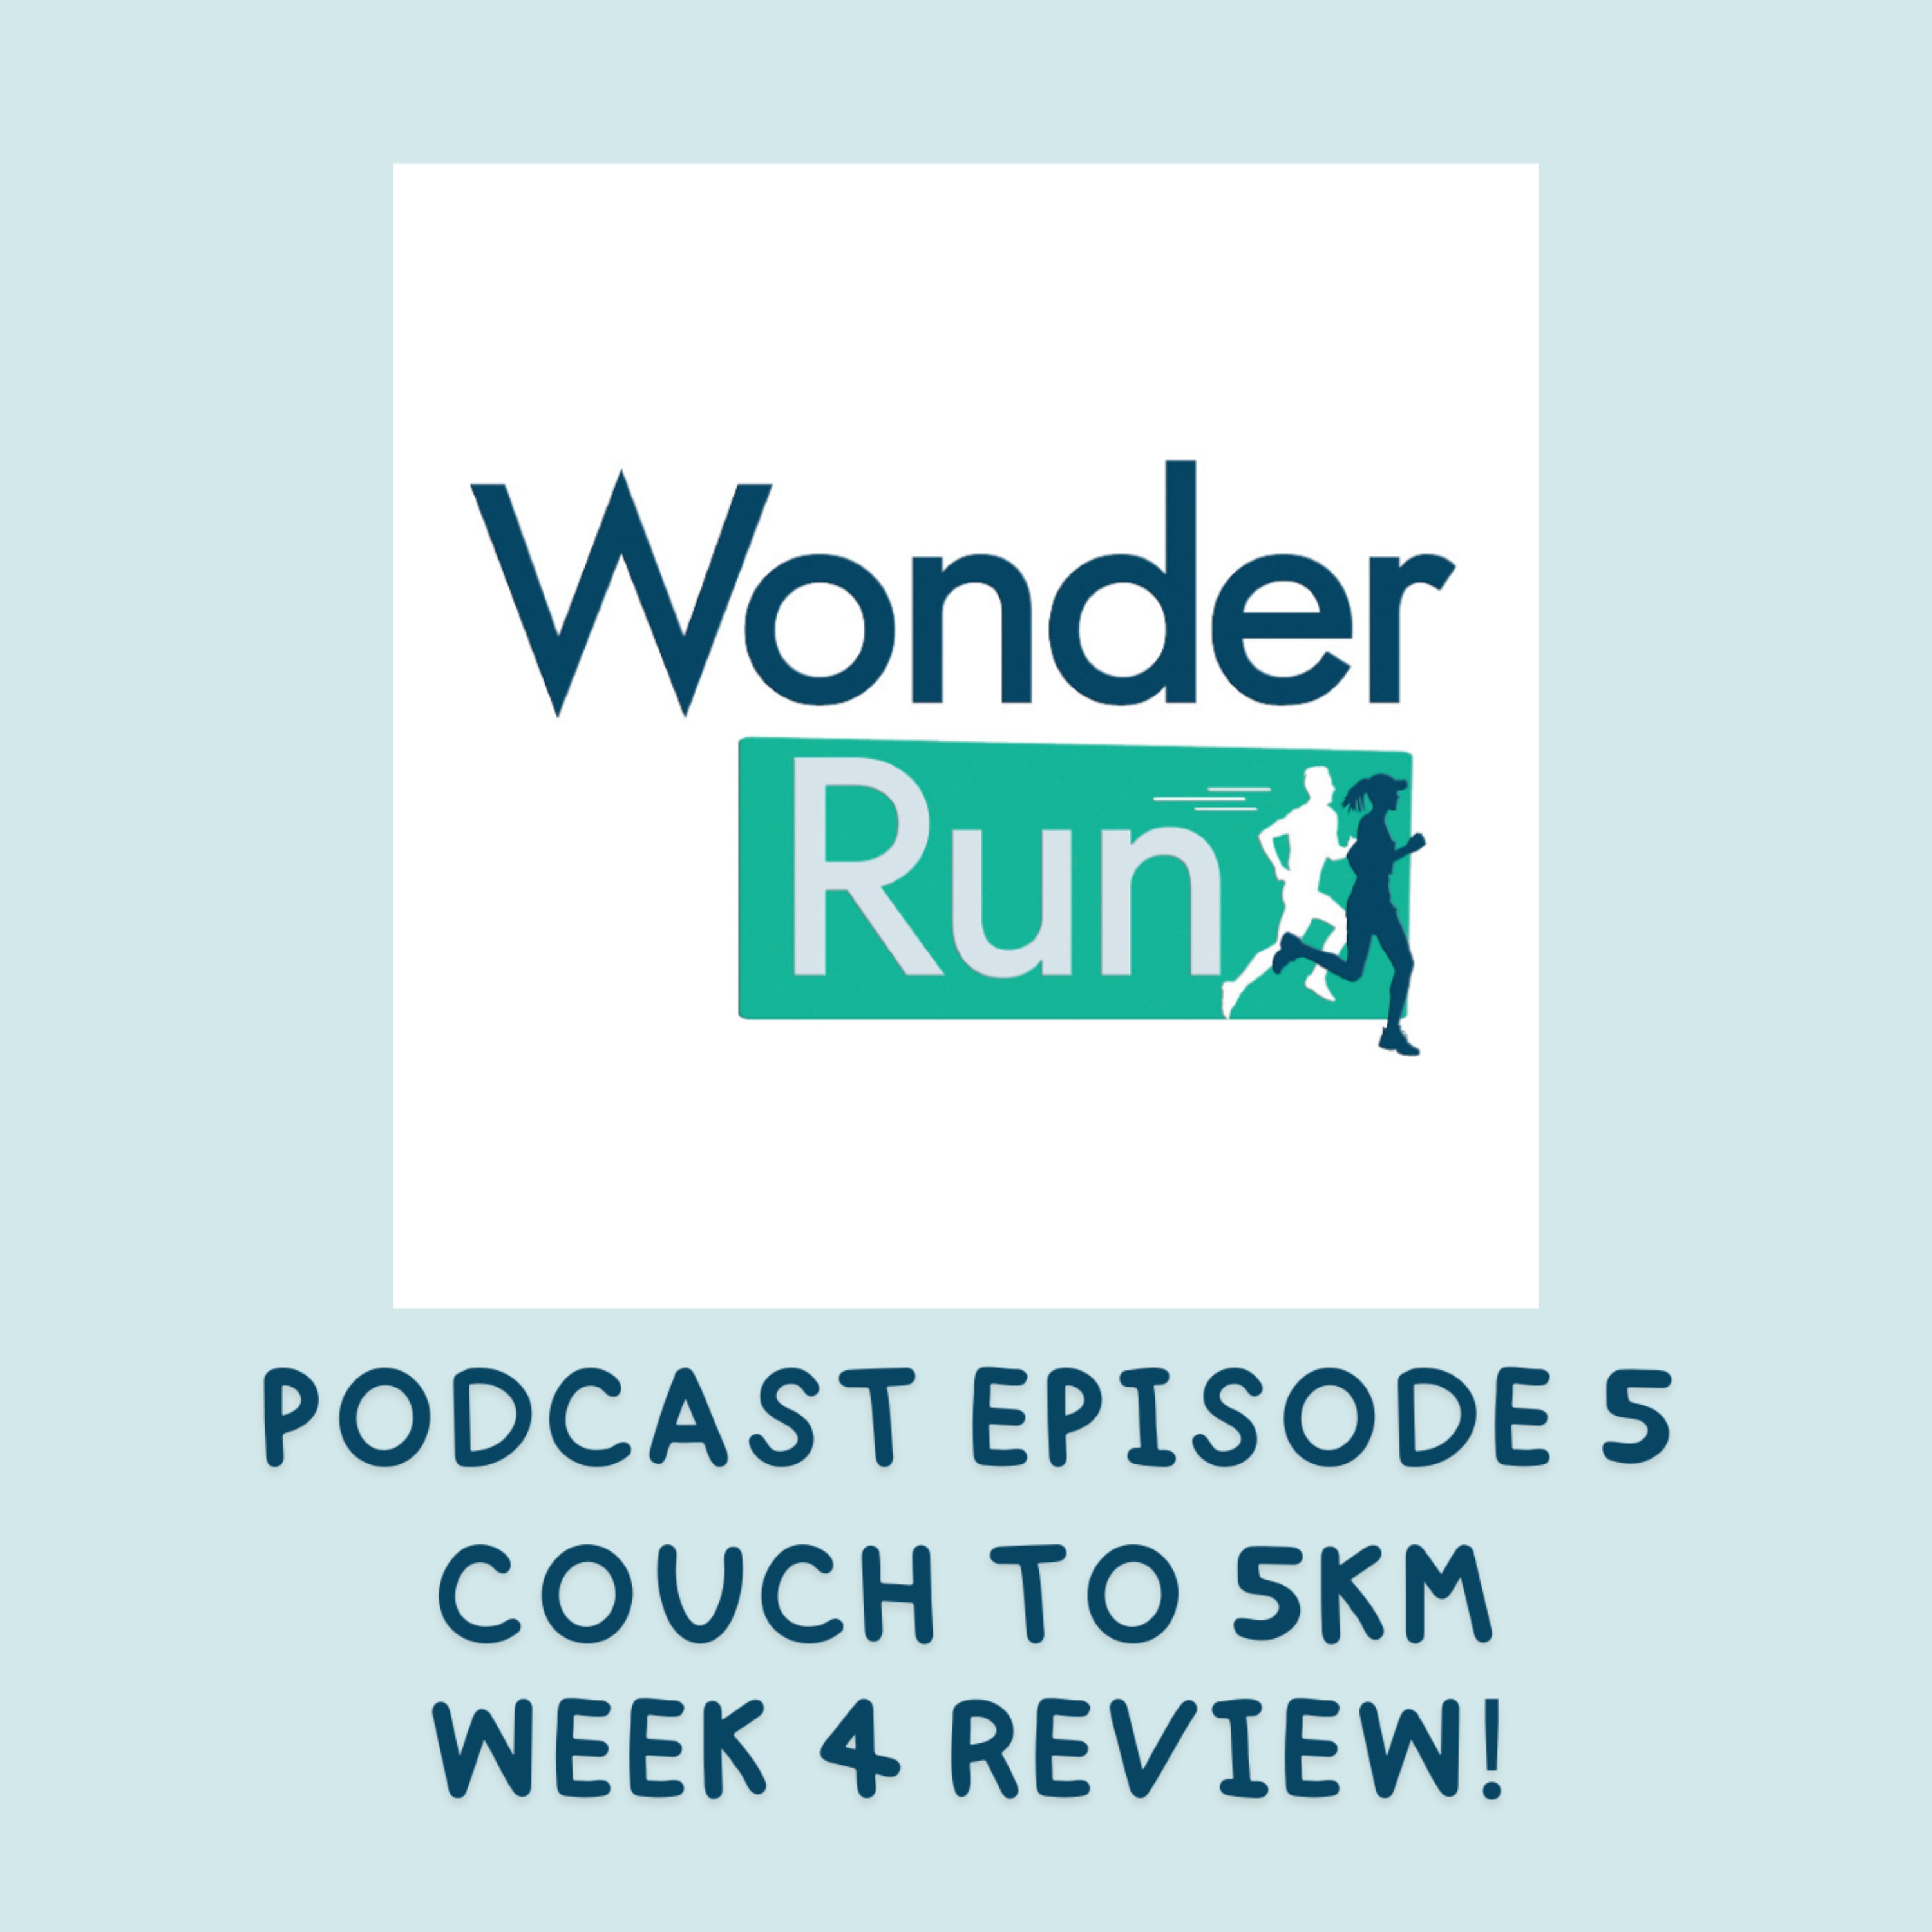 Couch to 5km - Week 4 Review!